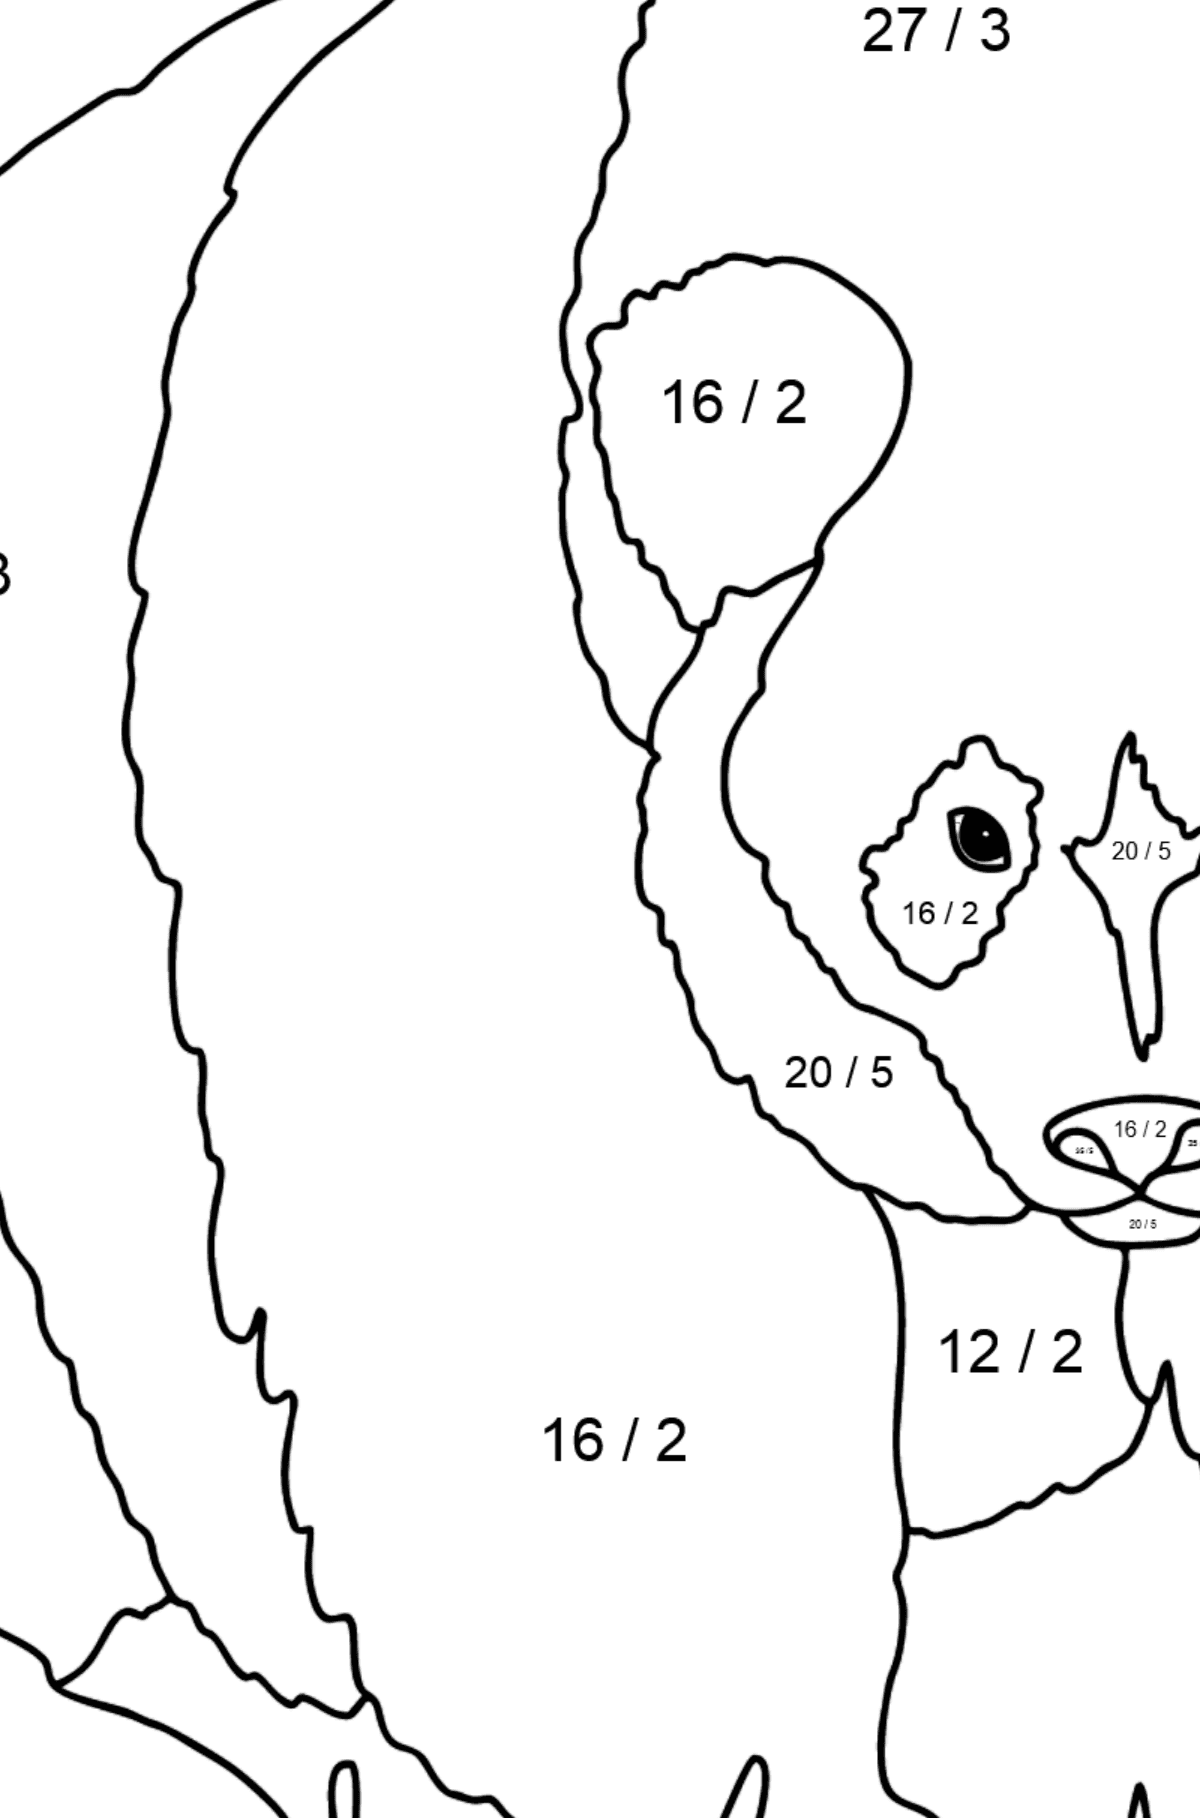 Coloring Page - A Panda is Preparing for Defense - Math Coloring - Division for Kids